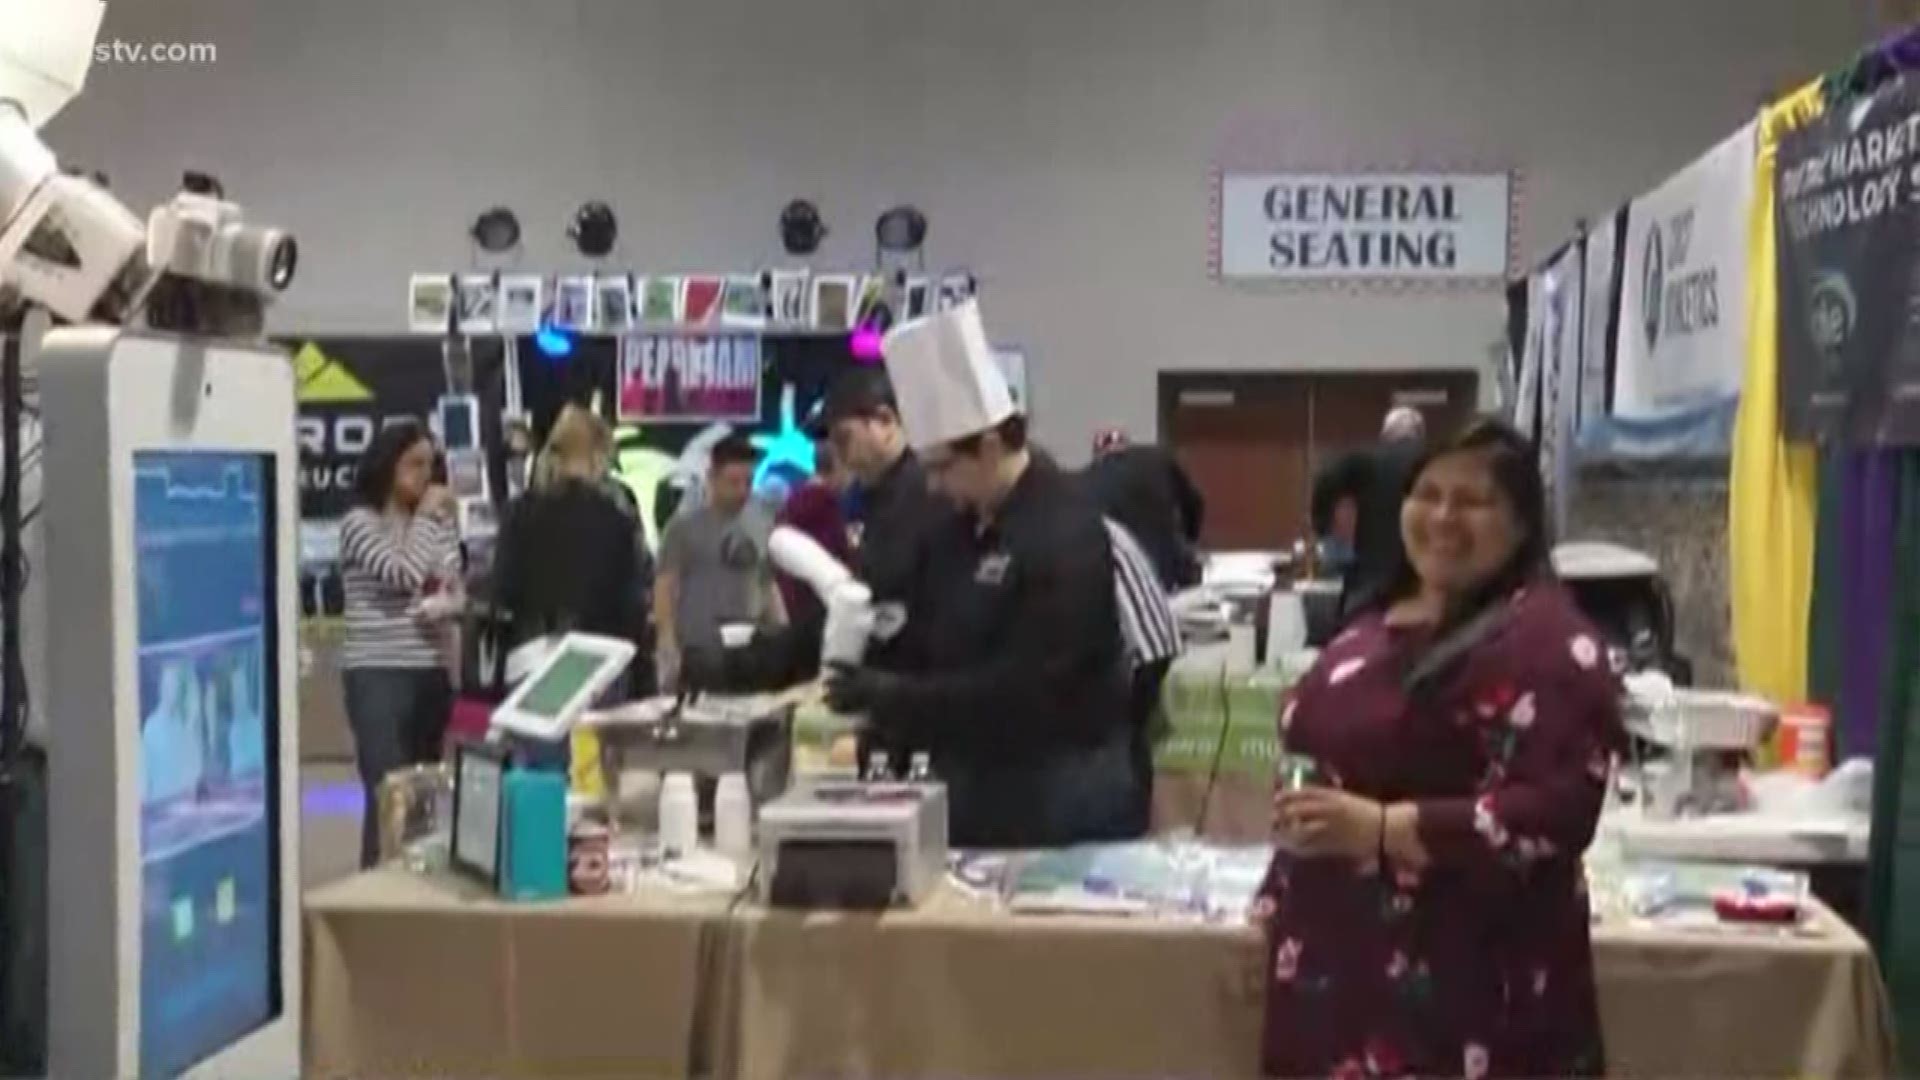 Jay O'Brien live at the 12th annual 50 Men Who can Cook event at the Expo Center.